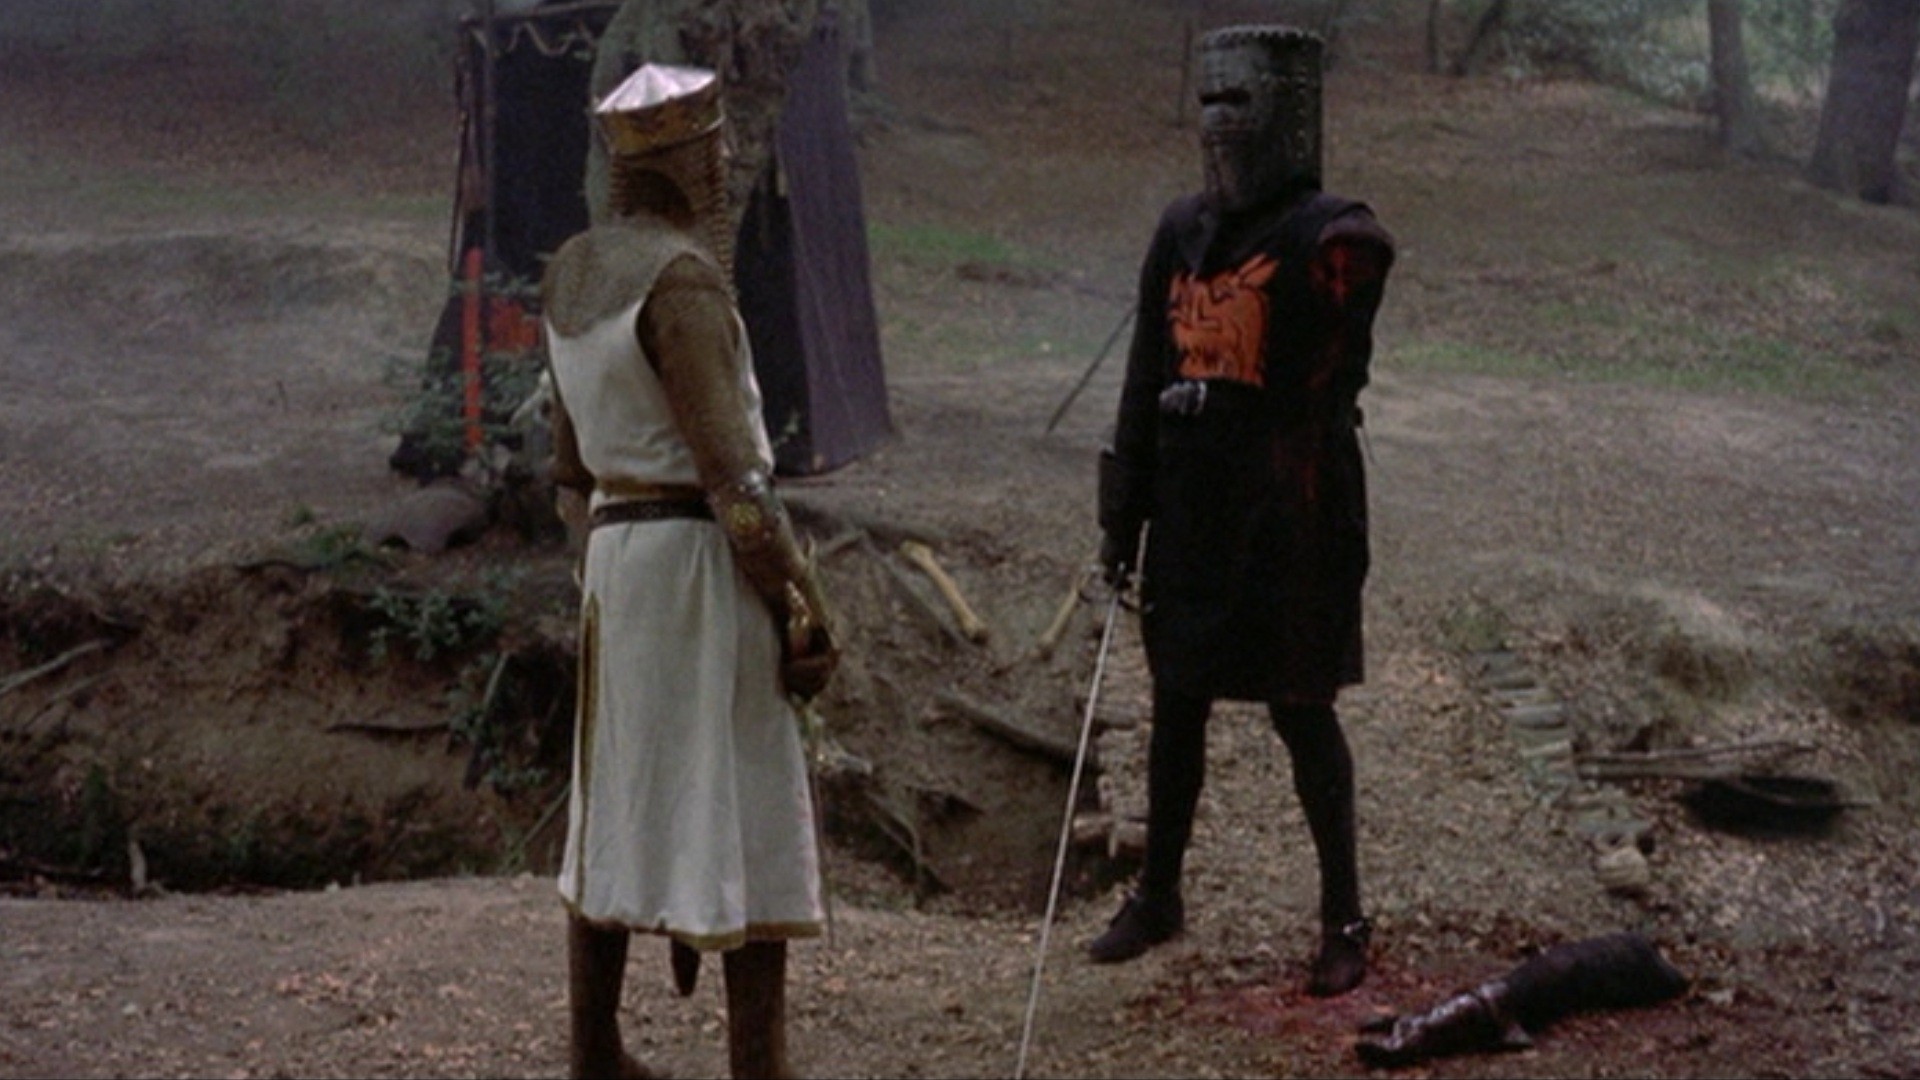 1920x1080 MONTY PYTHON AND THE HOLY GRAIL -- "tis but a scratch" hahahaha